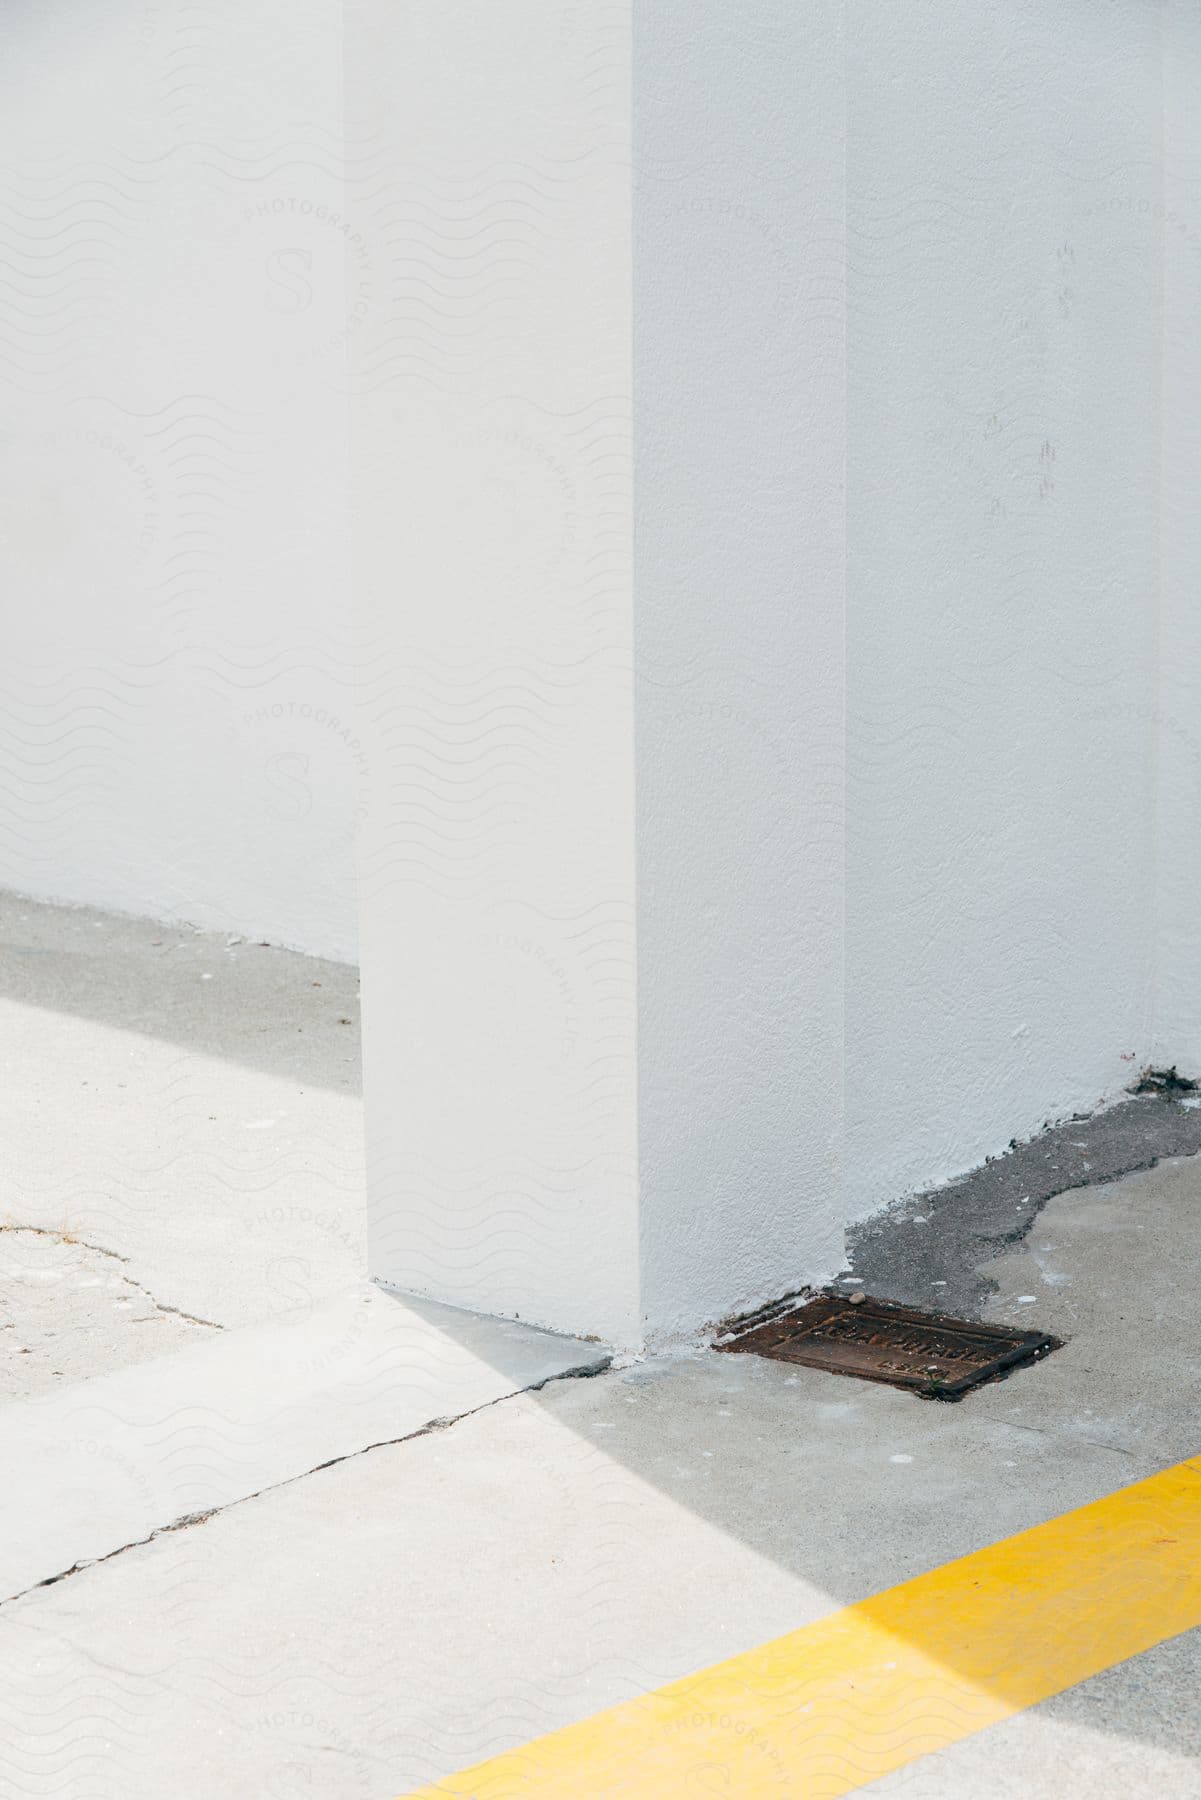 A white wall corner meets a concrete floor with a drain and a yellow line across the floor